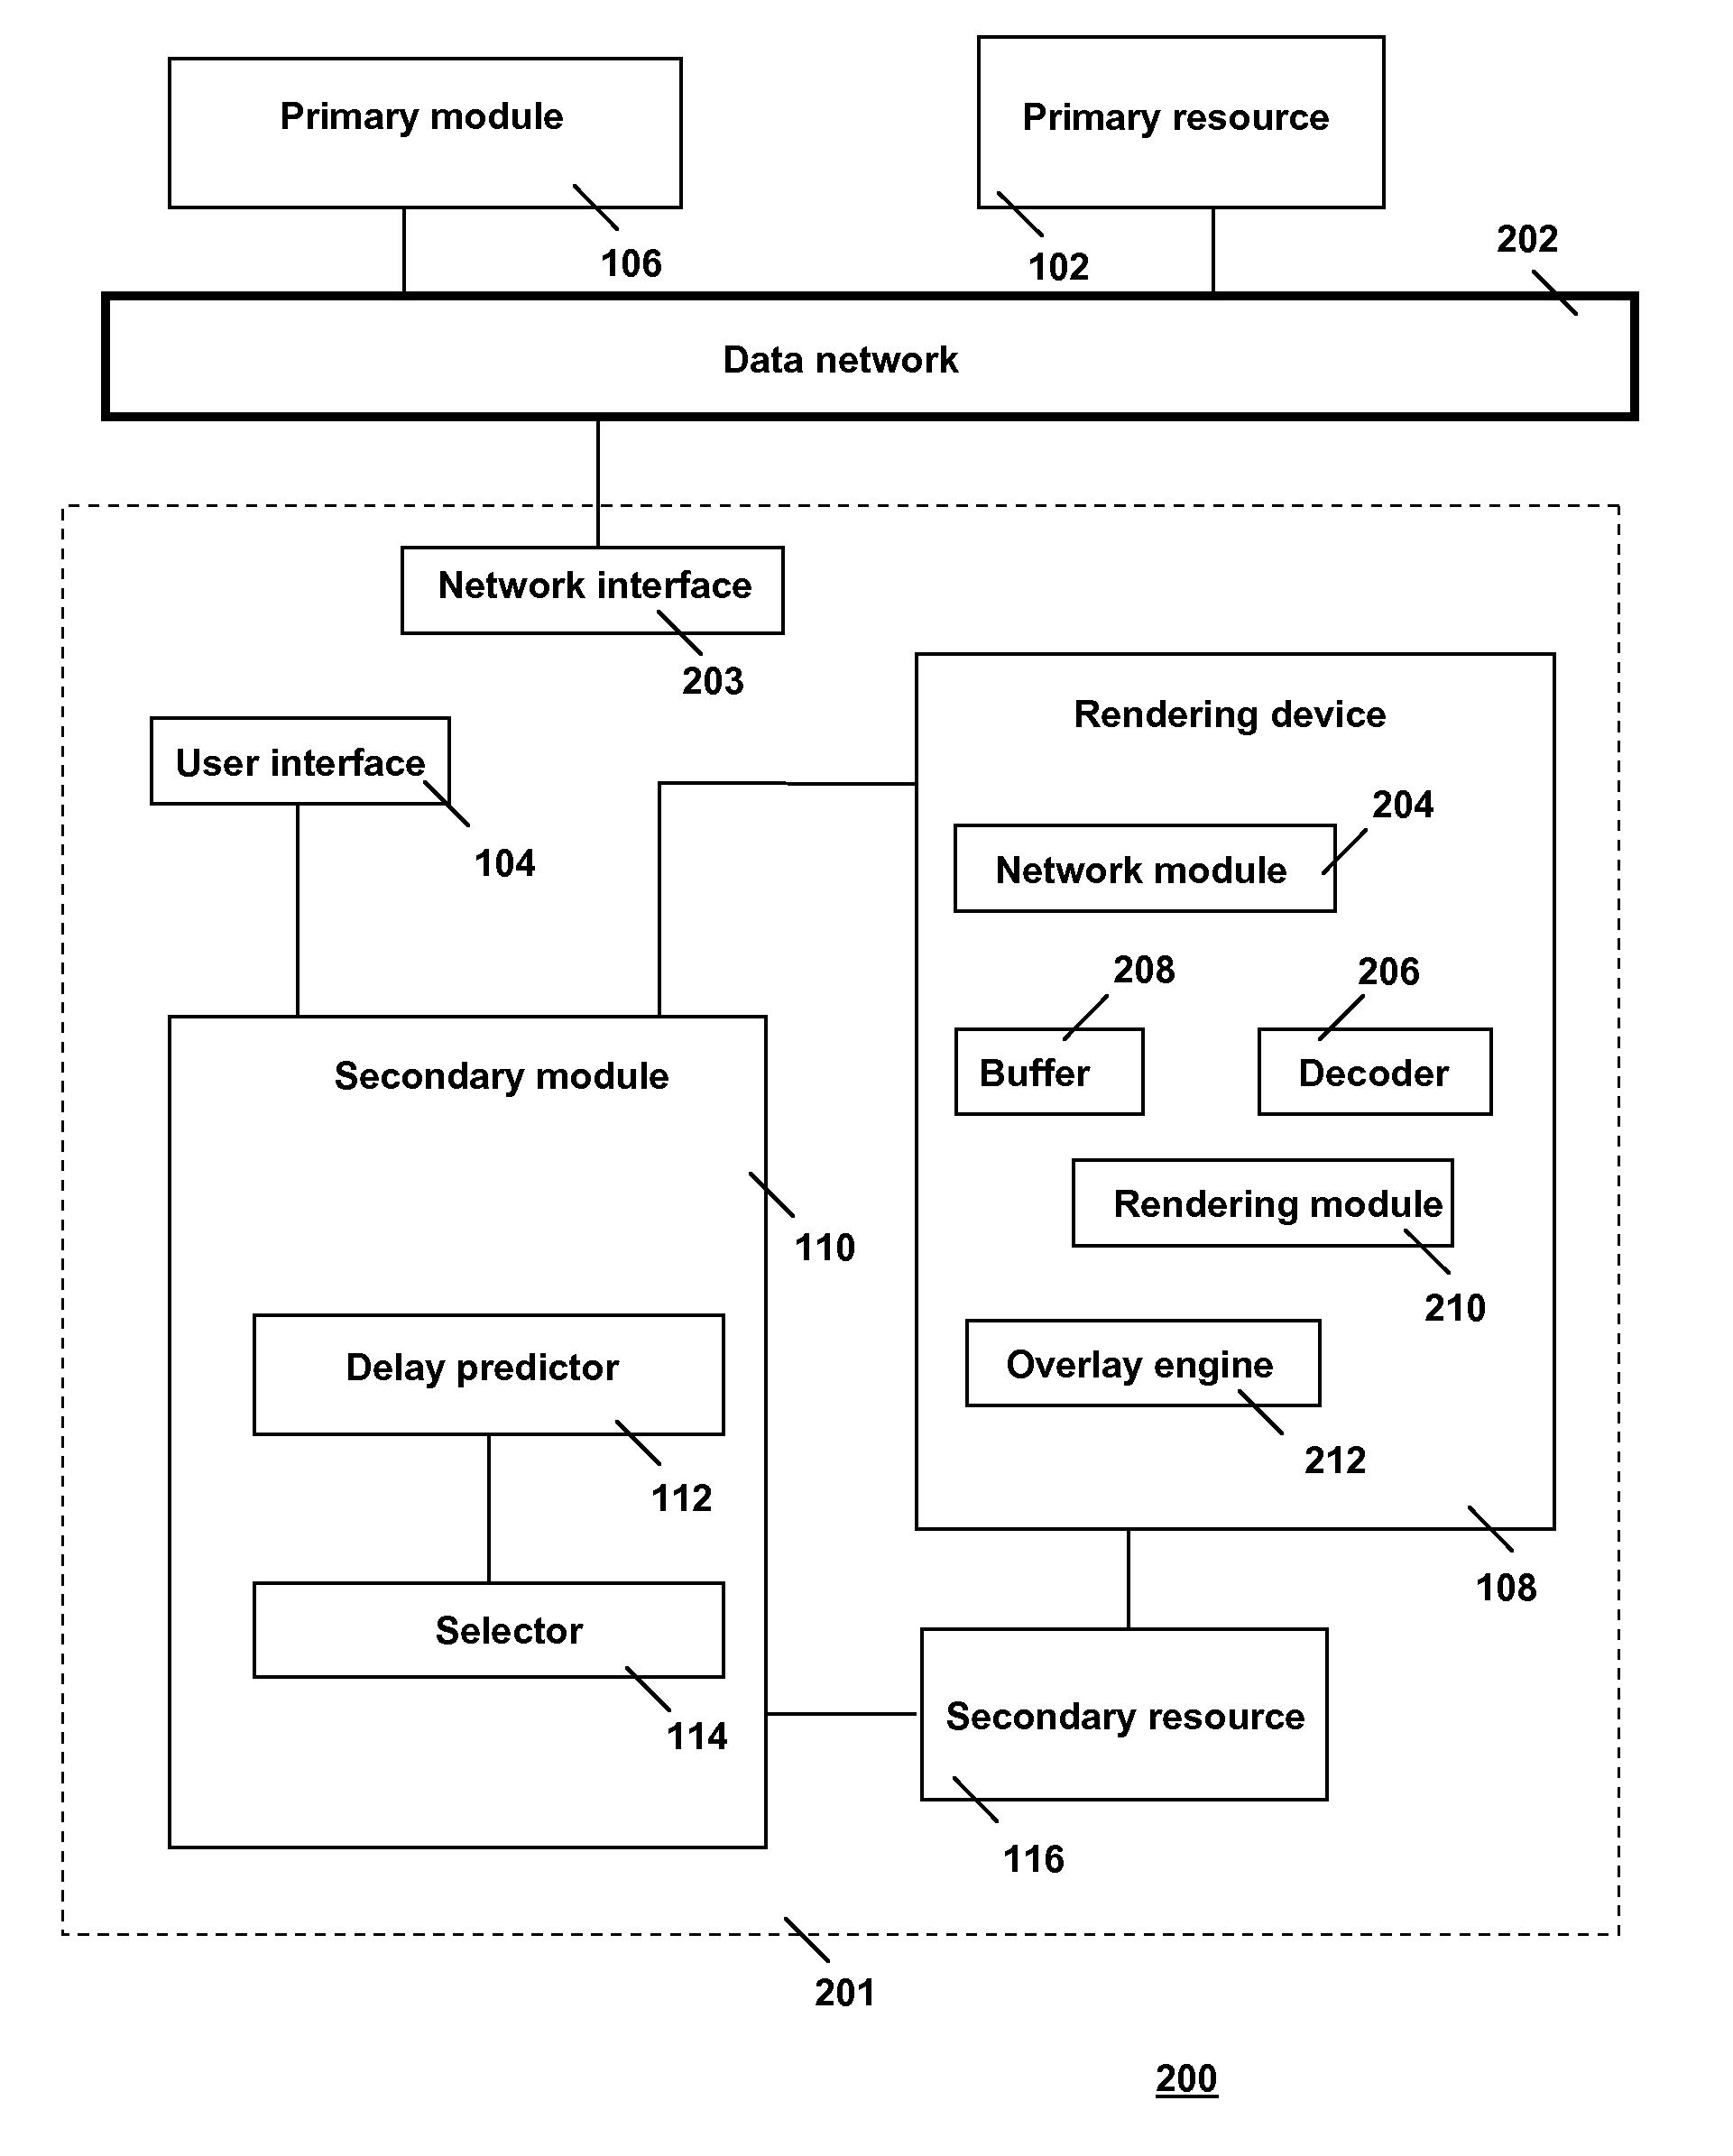 Playing Out Interludes Based on Predicted Duration of Channel-Switching Delay or of Invoked Pause